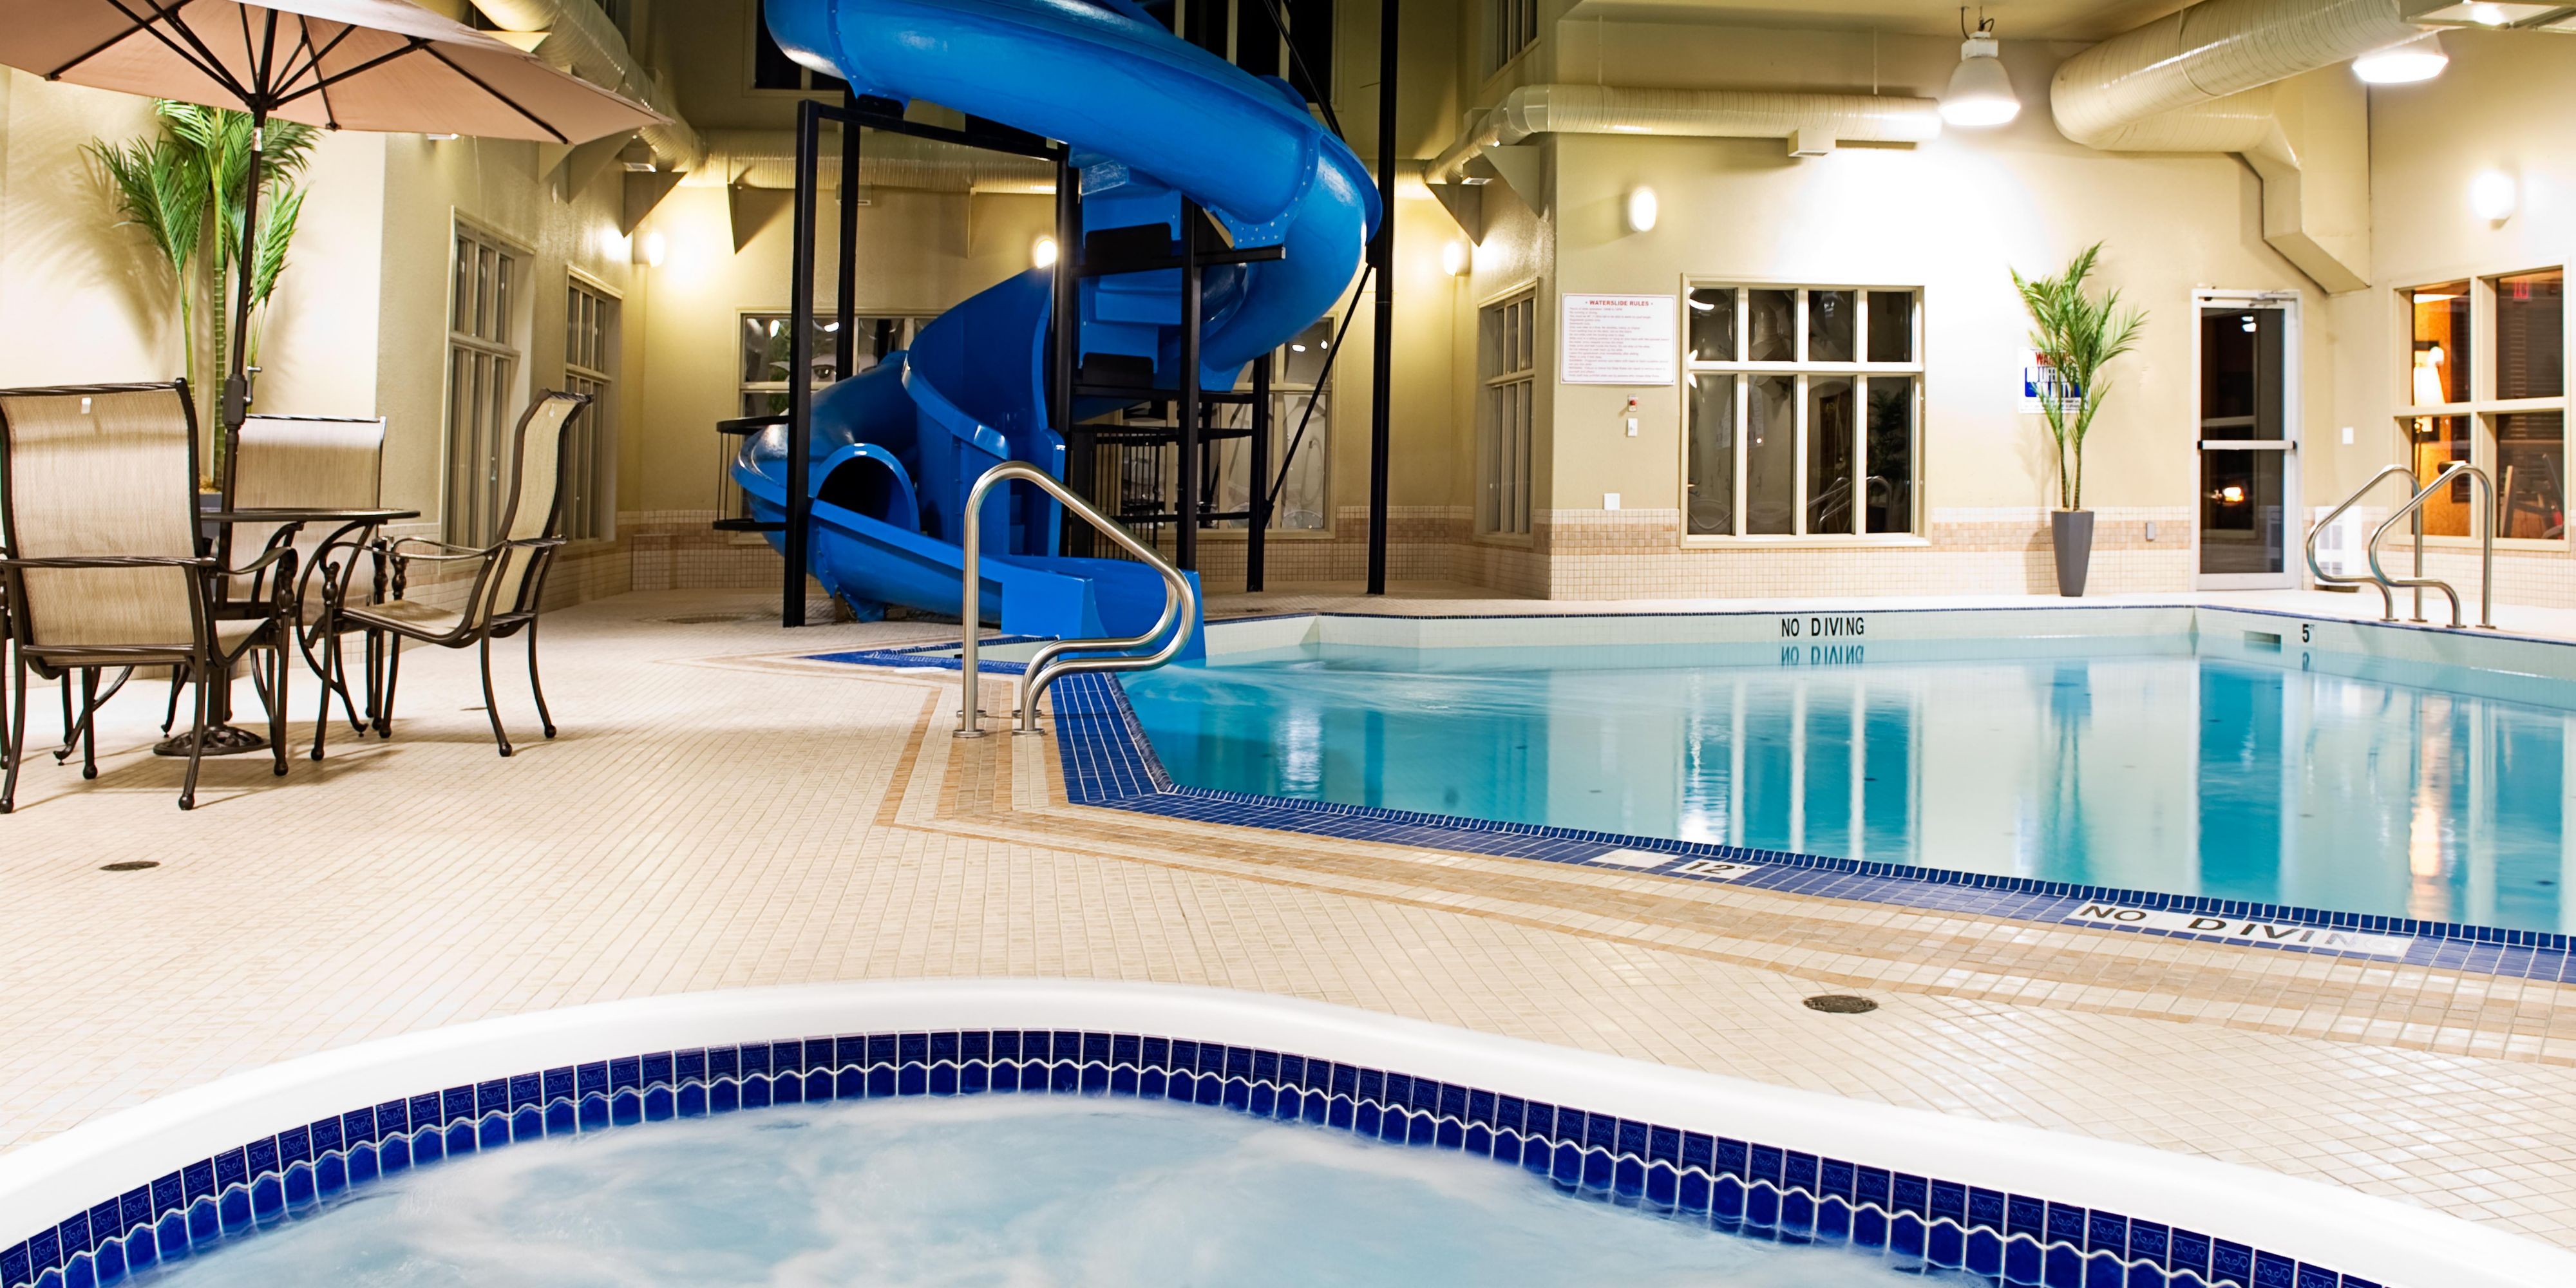 Our hotel features an indoor heated swimming pool, waterslide, and hot tub. You won't want to miss the chance to check it out.